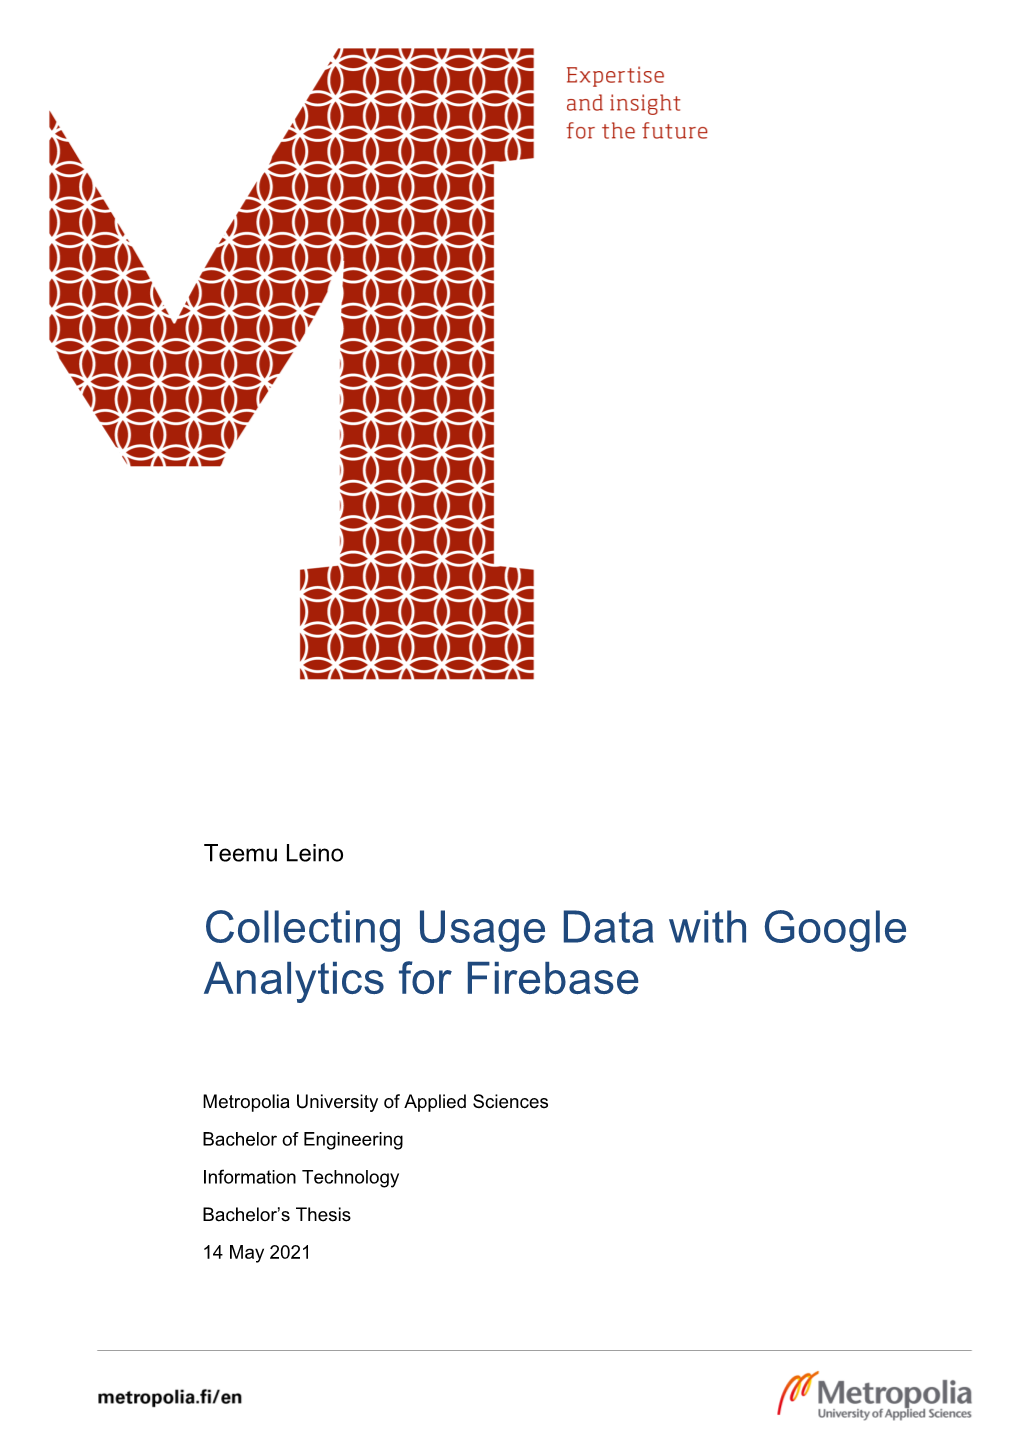 Collecting Usage Data with Google Analytics for Firebase